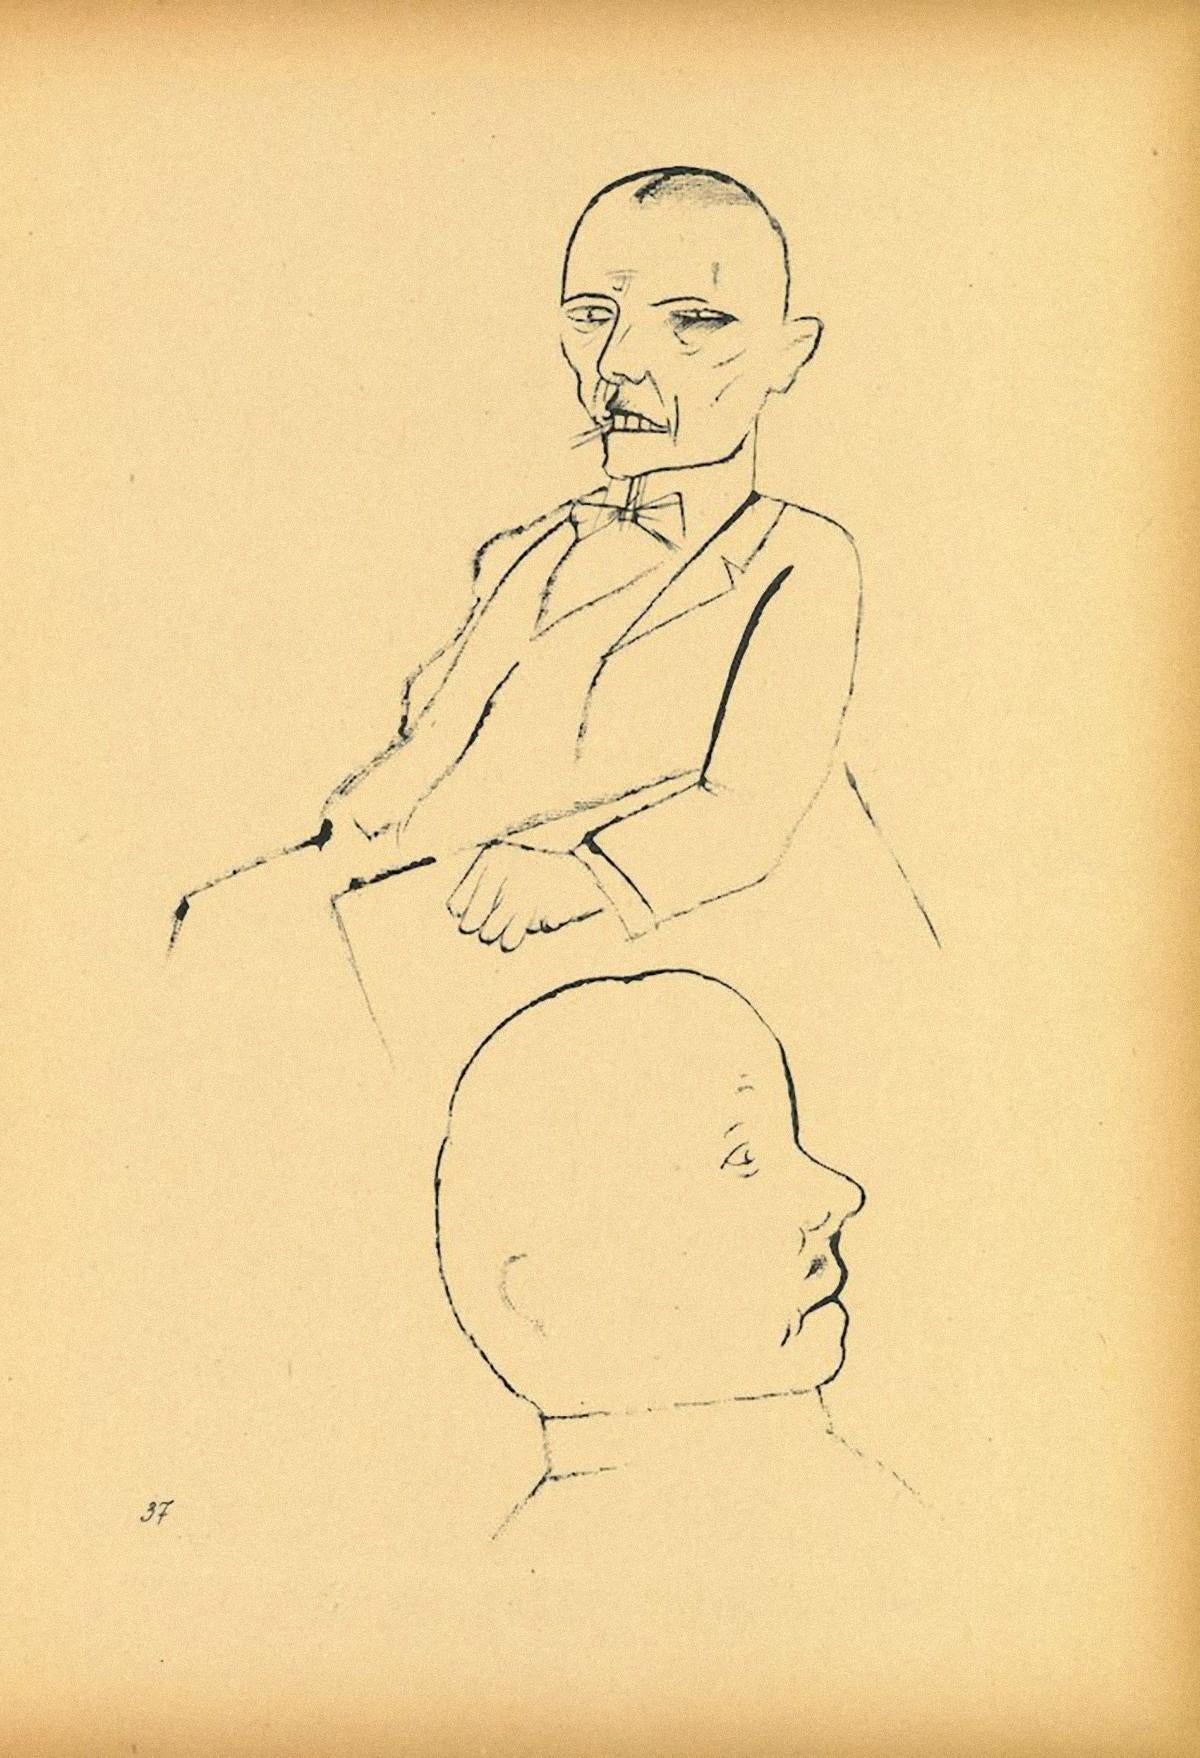 In Thought - Original Offset and Lithograph by George Grosz - 1920